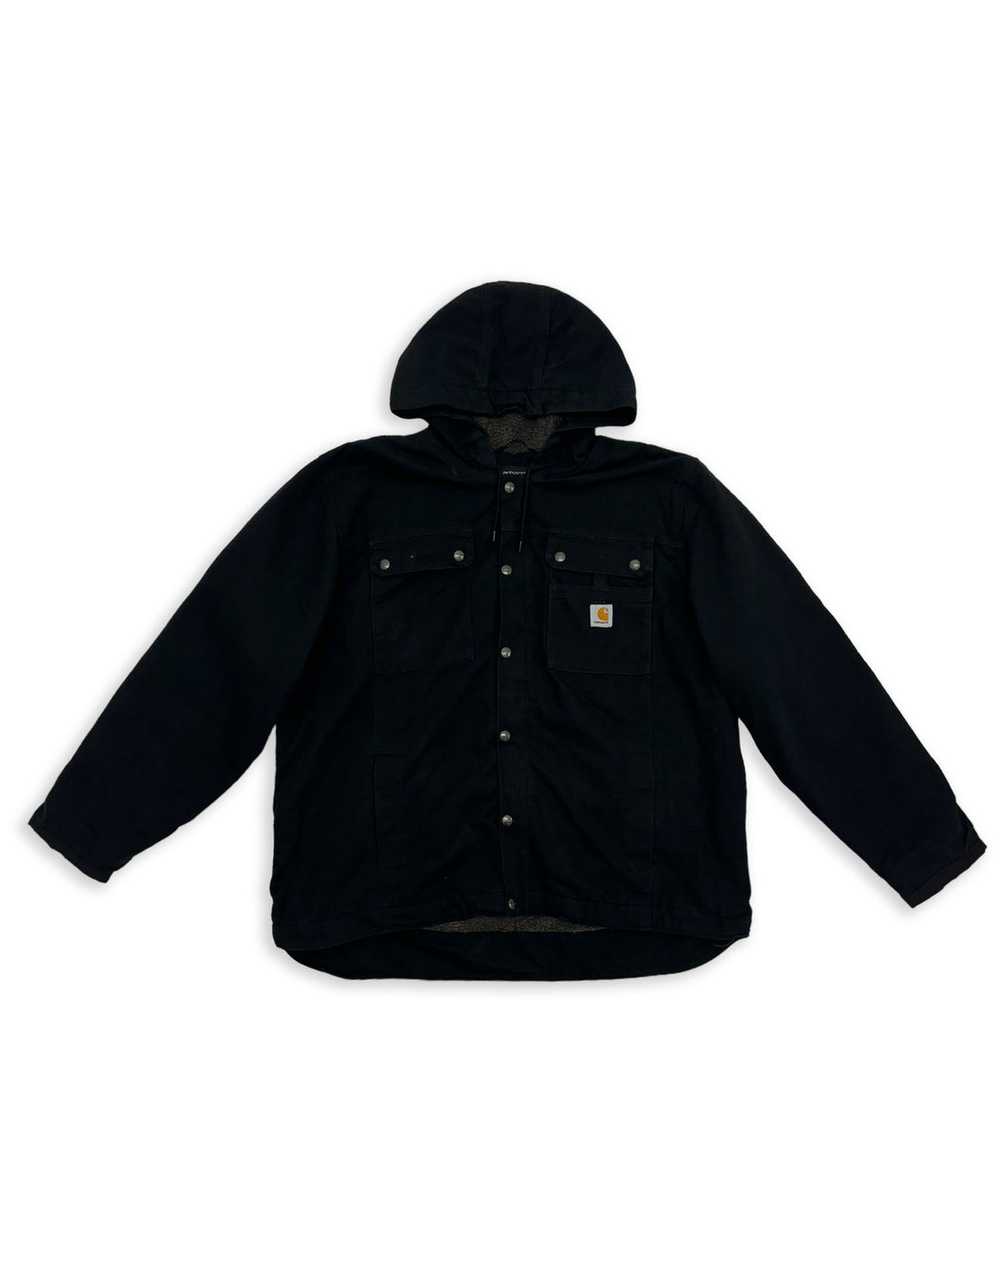 CARHARTT BLACK LOOSE FIT BUTTON JACKET (XL) - image 1